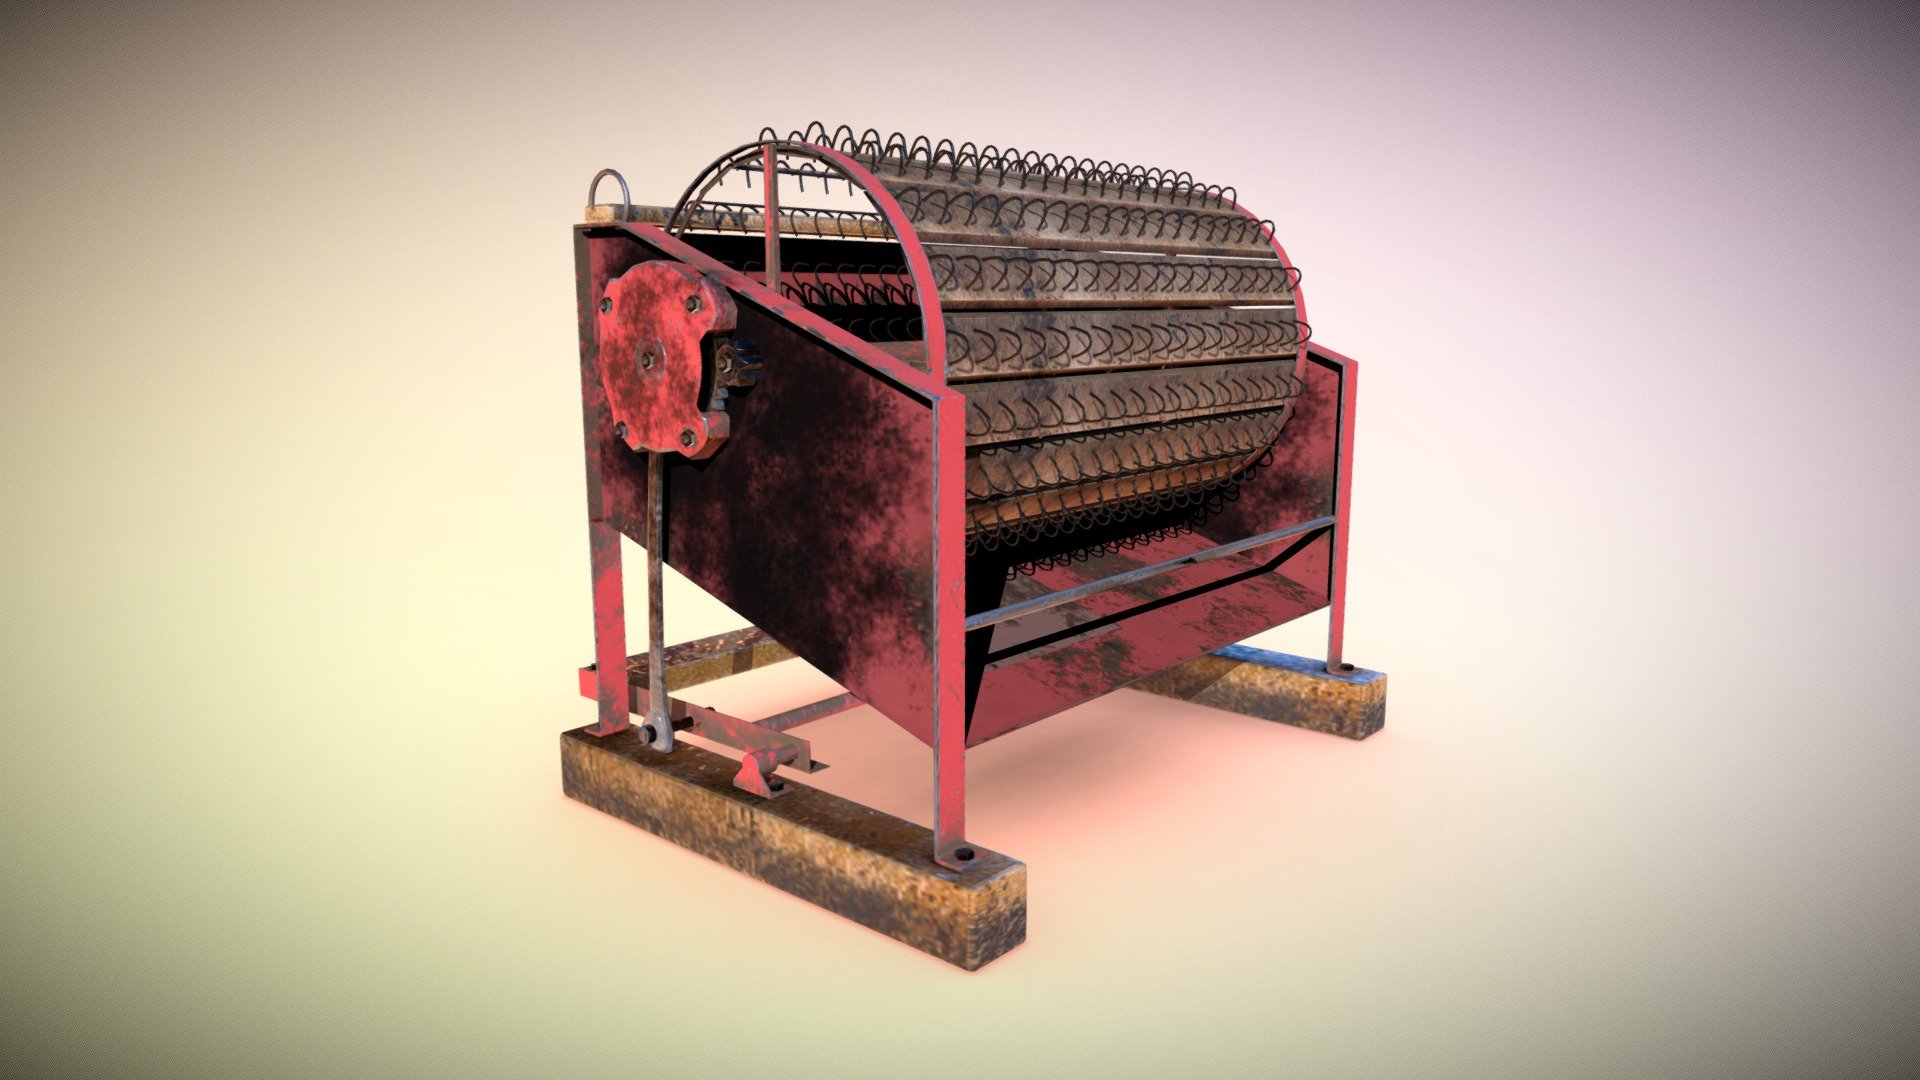 Its a simple Paddy Thresher Machine in Rural area of Bangladesh. The farmer process the pady initially by using these machine , 
* Its paddle is press through leg pressure &amp; the wheel mechanically move to forward.


Its a fan project of the Heritage of my country . 
As 3d Model Artist I implement my knowledge &amp; labour to make this . Any criqituqes is highly appreciated . 

*modeled in Maya, Textured in Substance Painter.

Any 3d game ready model needed you are welcome to knock me.

https://www.fiverr.com/share/ldjpg2 - Paddy Thresher Machine in Bangladesh - 3D model by sharifakram 3d model